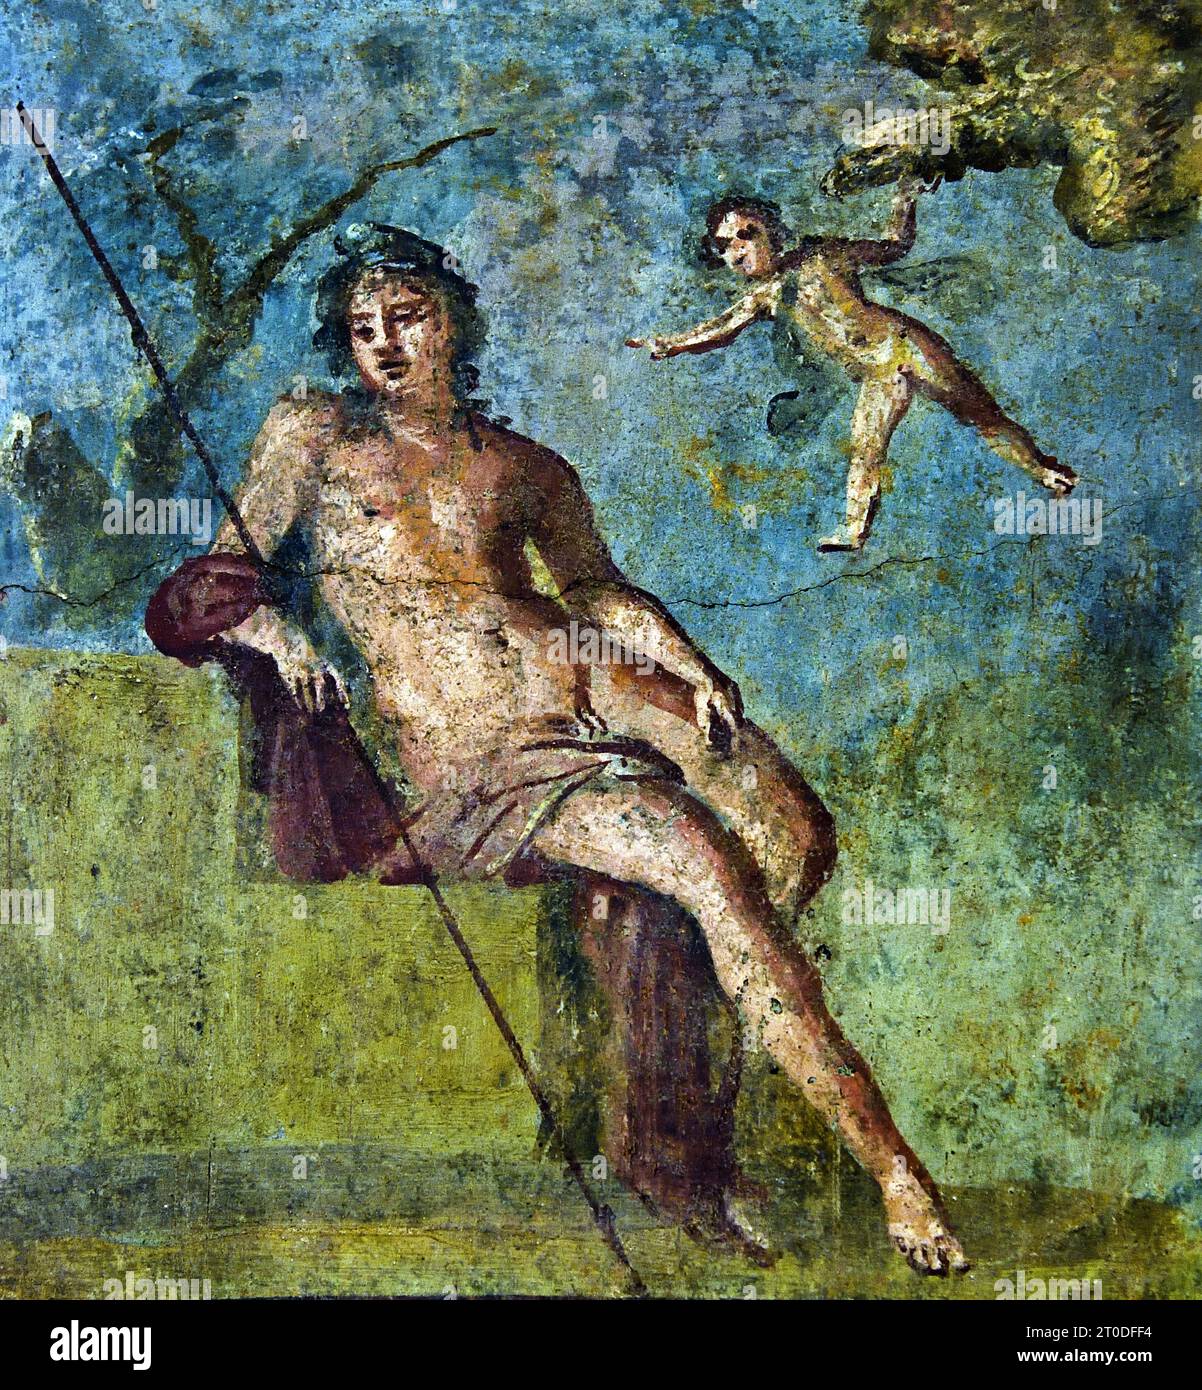 Ganymede 62-79 AD Fresco Pompeii Roman City is located near Naples in the Campania region of Italy. Pompeii was buried under 4-6 m of volcanic ash and pumice in the eruption of Mount Vesuvius in AD 79. Italy ( Young Trojan prince kidnapped by the gods to serve as cupbearer to Zeus, He was the most beautiful among mortals. ) Stock Photo